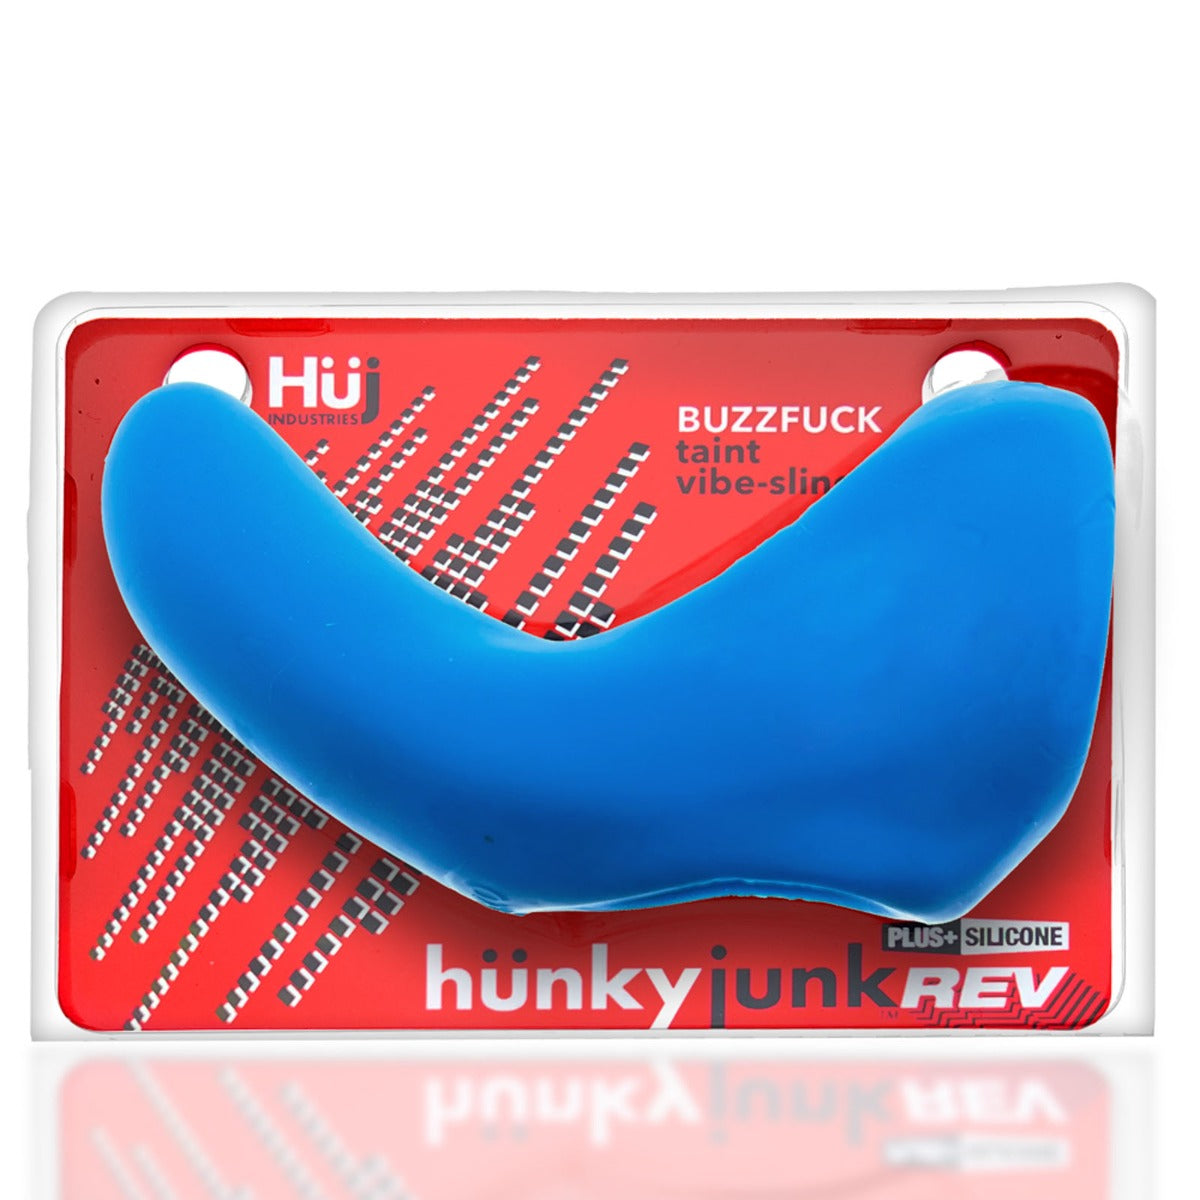 Hunkyjunk Buzzfuck Sling With Taint Vibe Vibrating Cock Sling Teal Ice